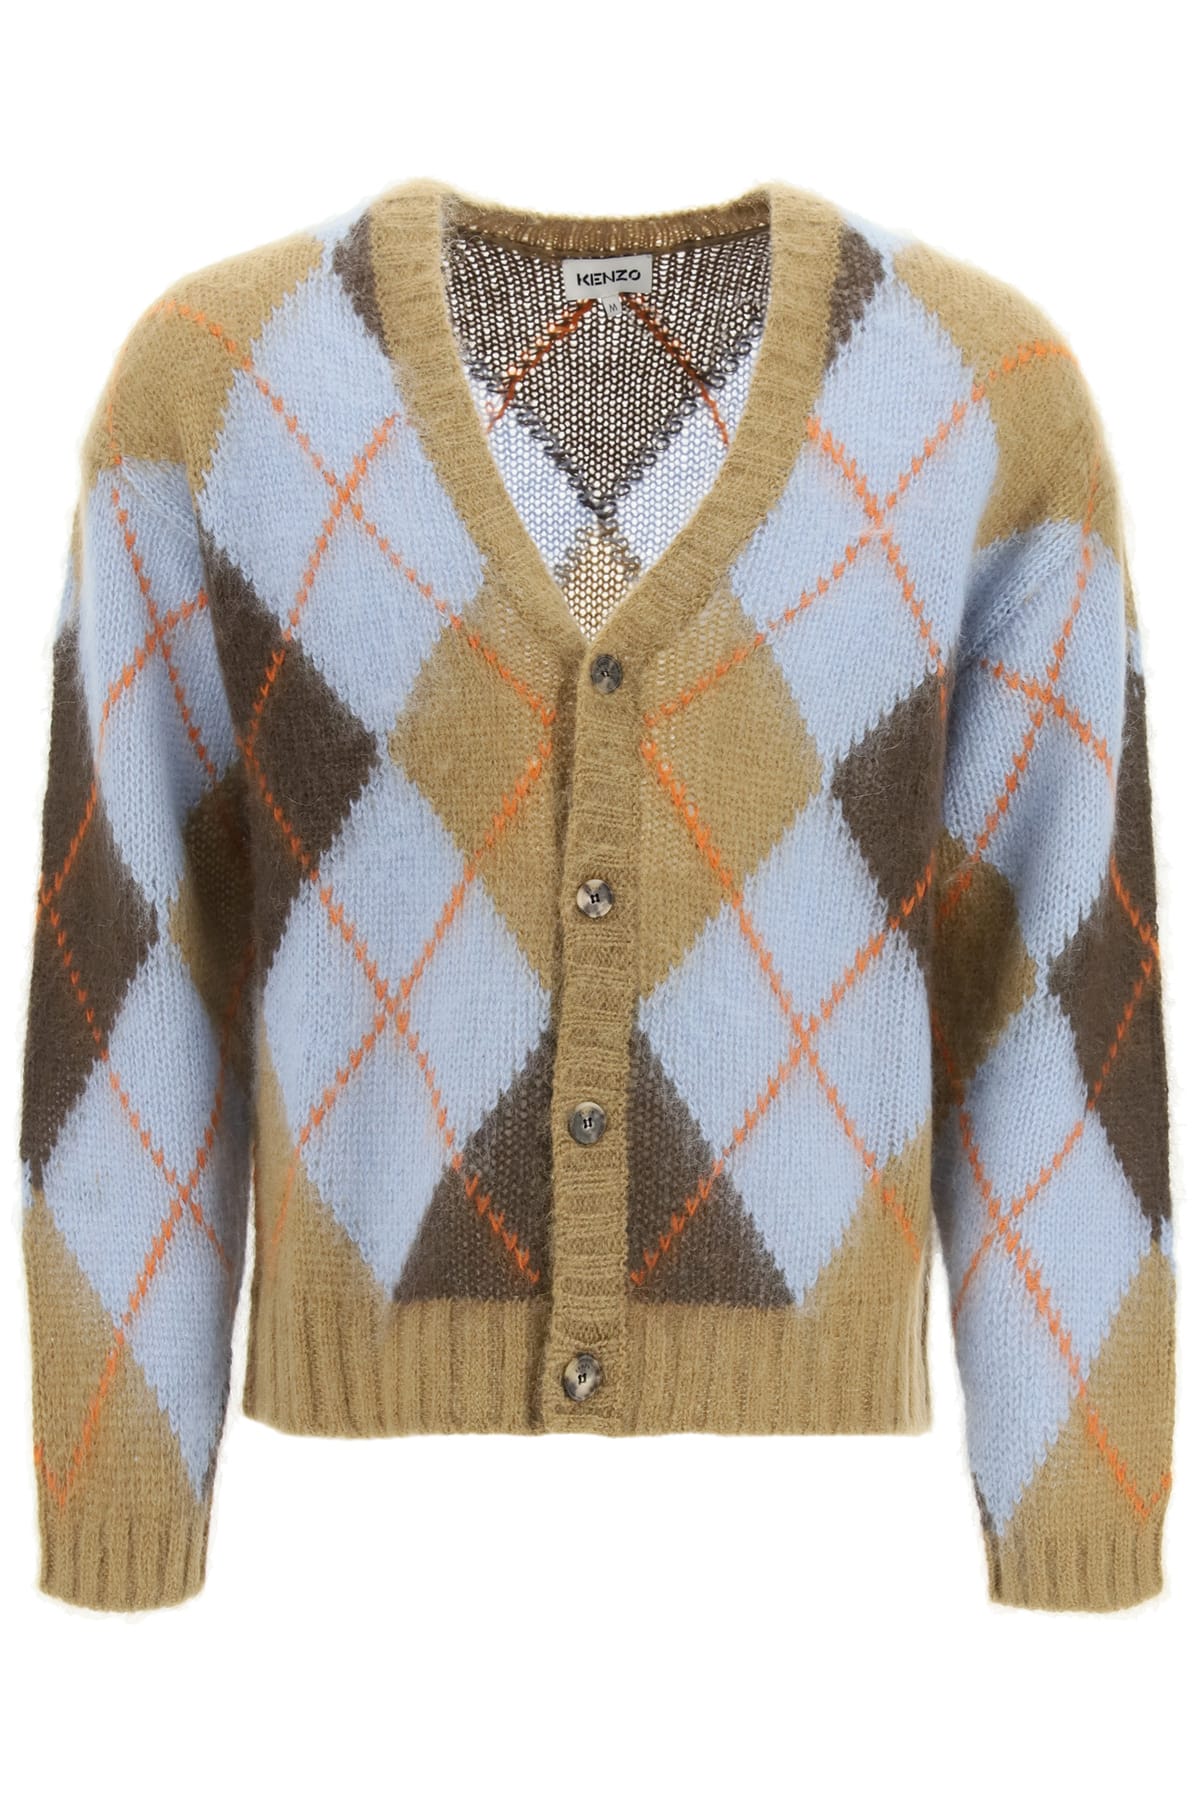 Kenzo Wool And Mohair Argyle Cardigan